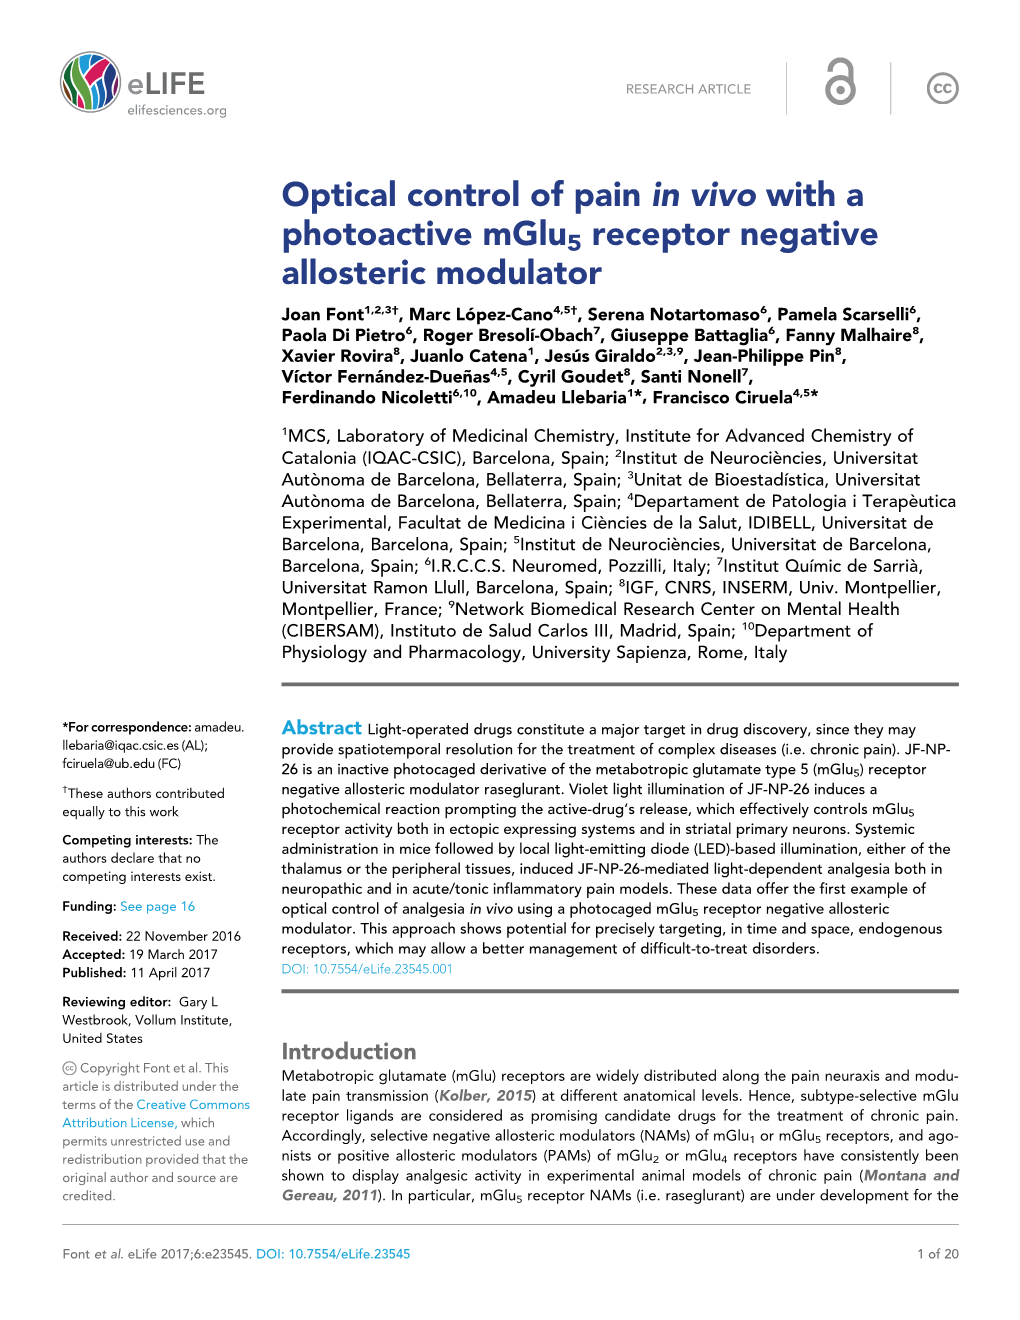 Optical Control of Pain in Vivo with a Photoactive Mglu5 Receptor